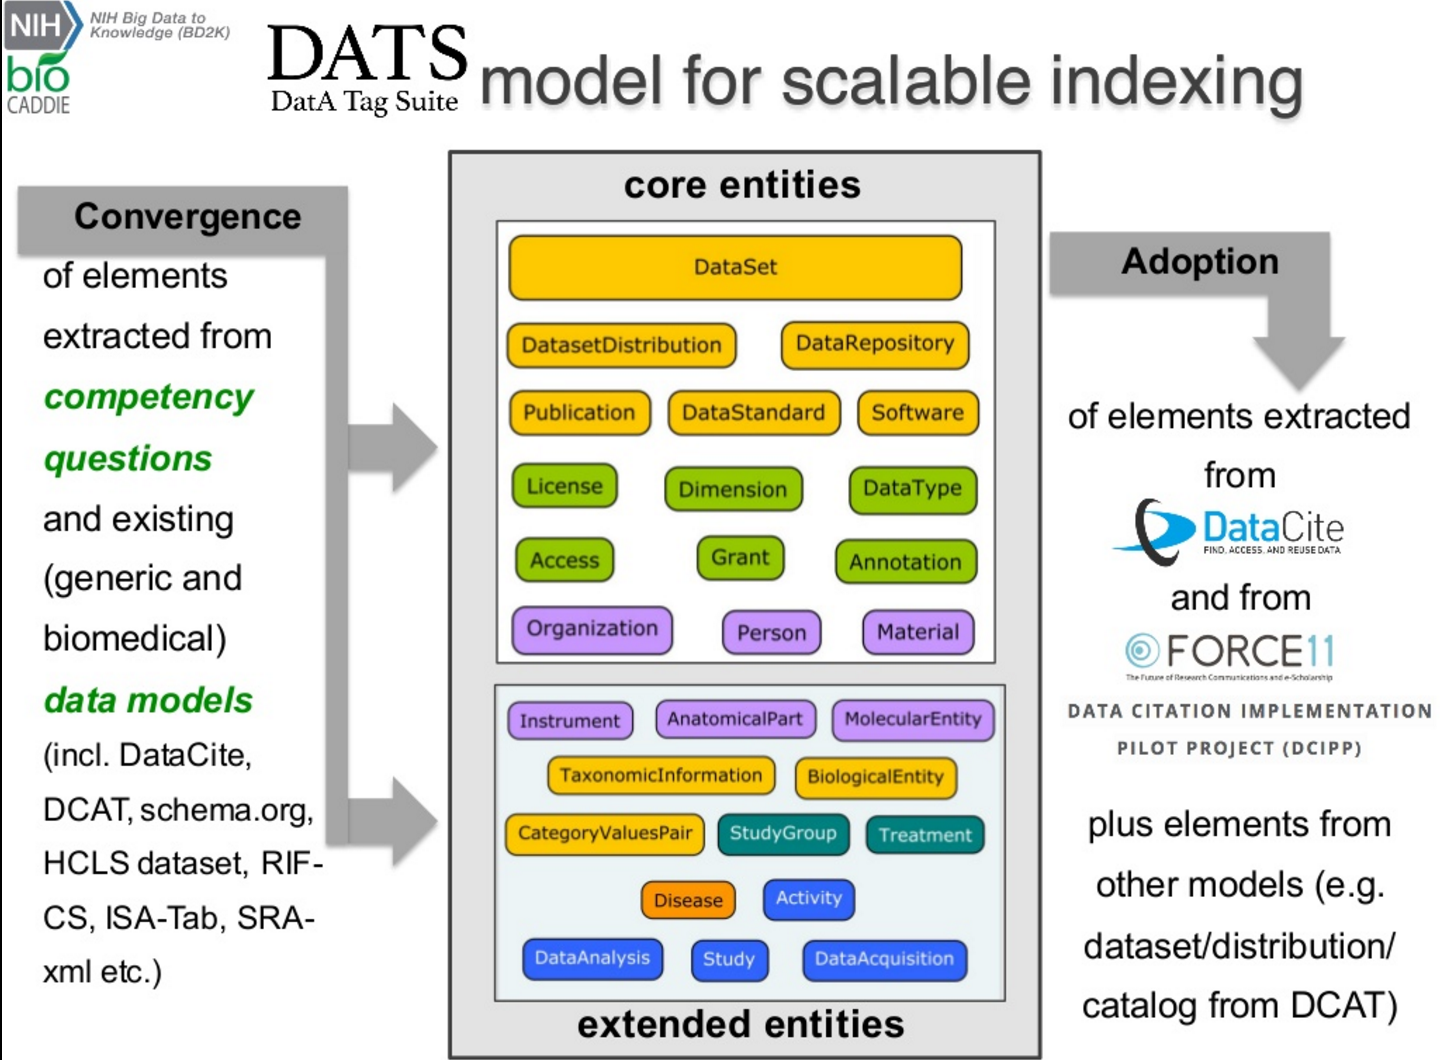 A busy slide with references to lots of standards, vocabulary elements and organizations including DataCite and Forece 11